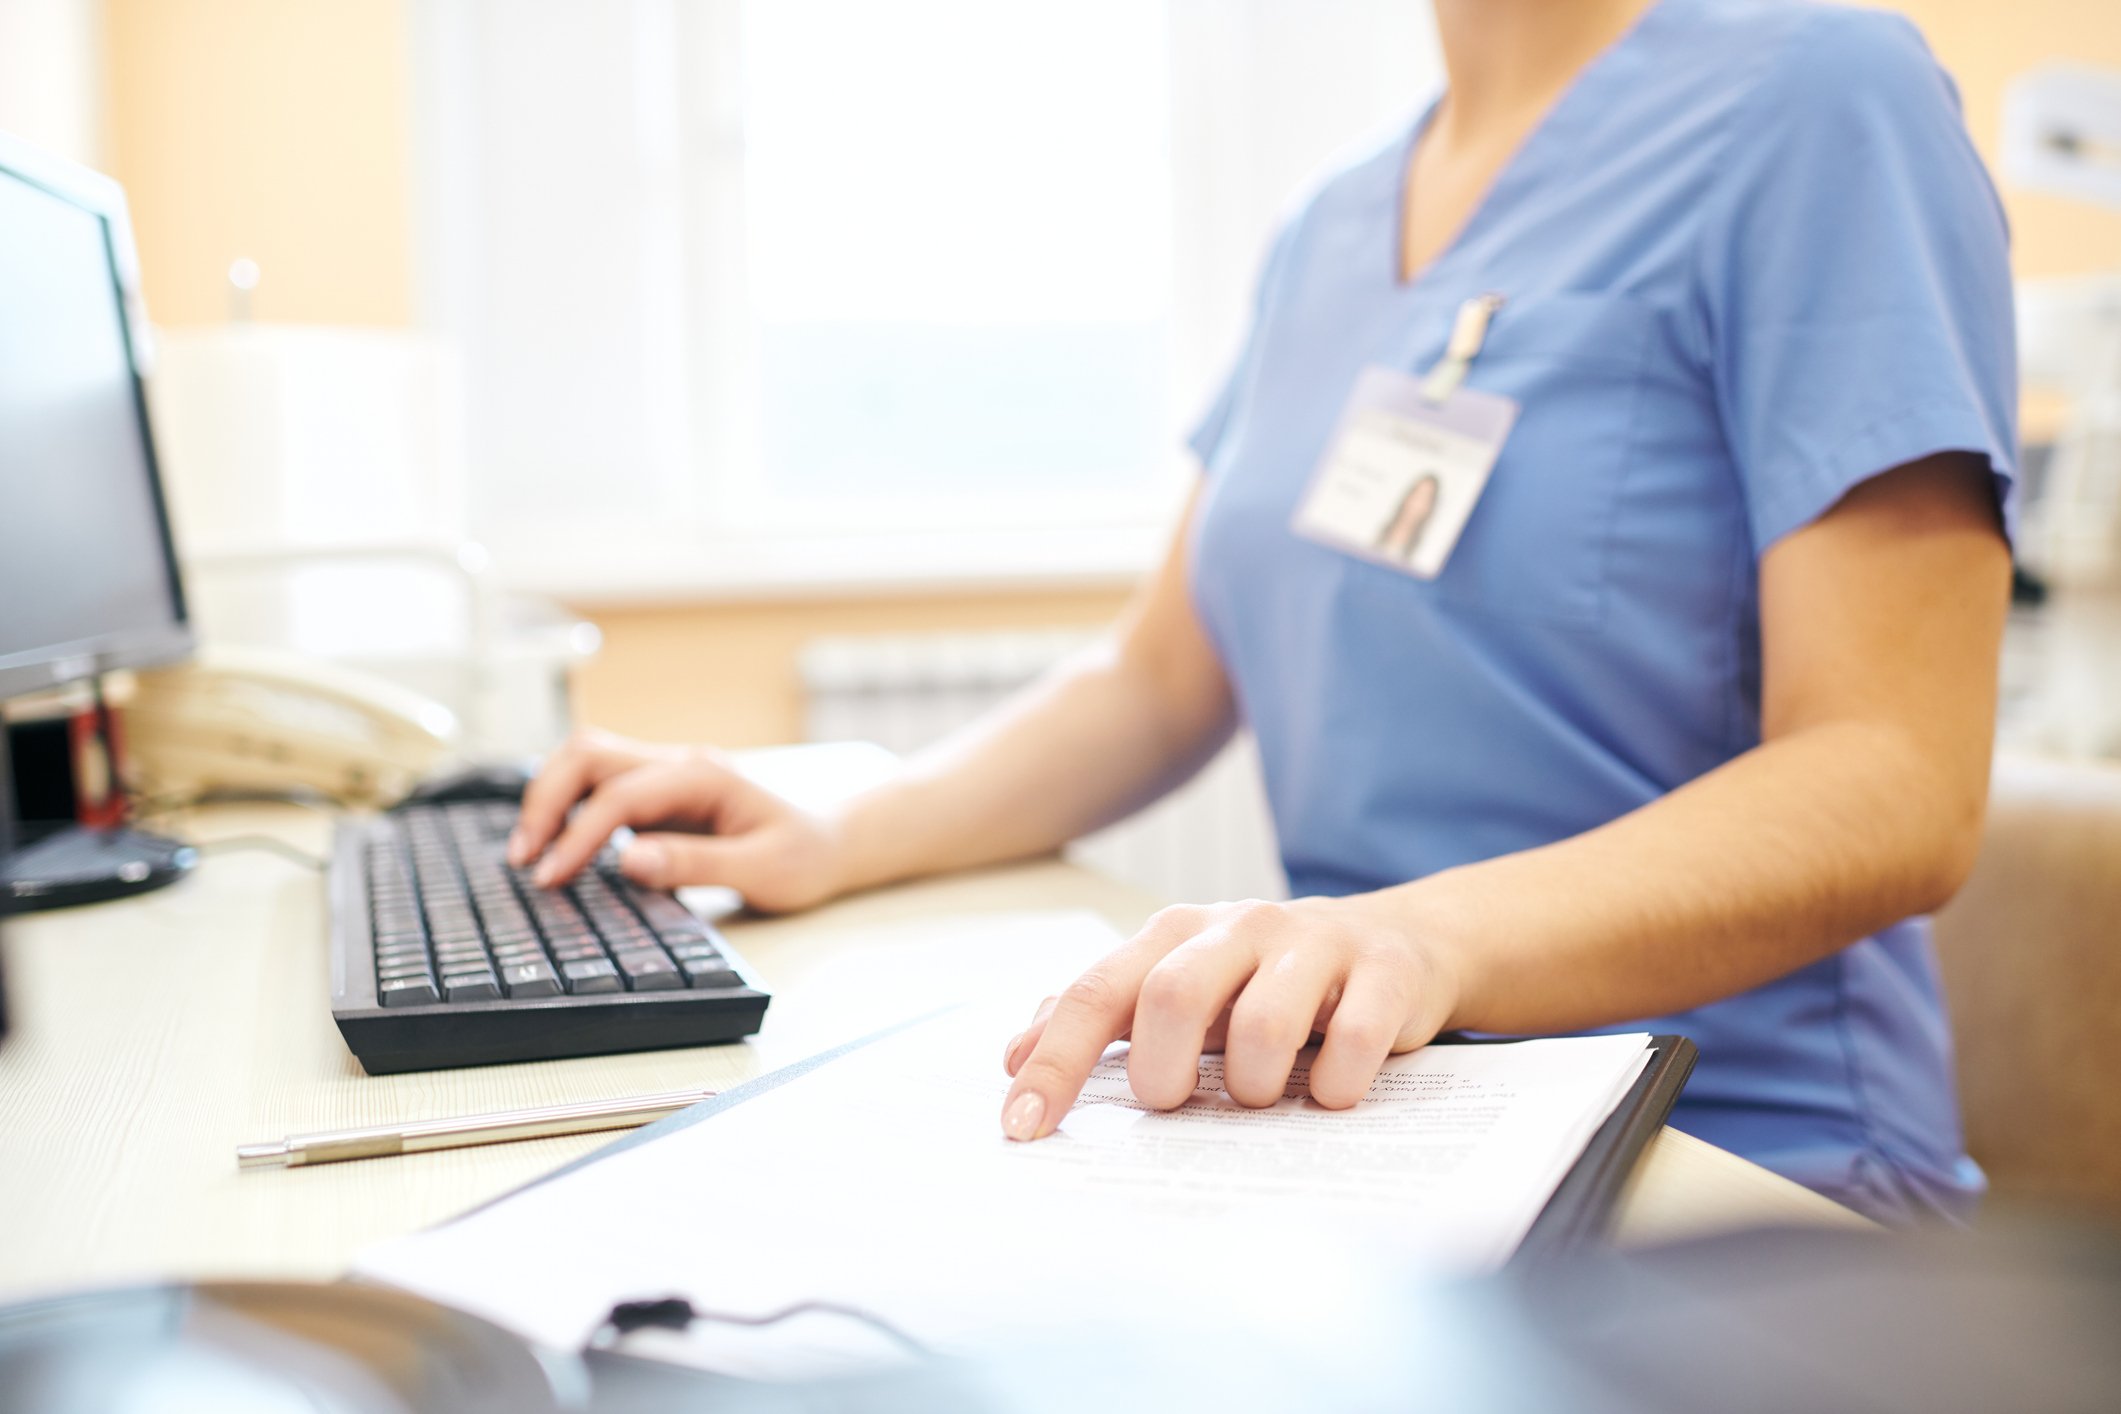 Nurse sitting at desk and using computer while analyzing medical notes